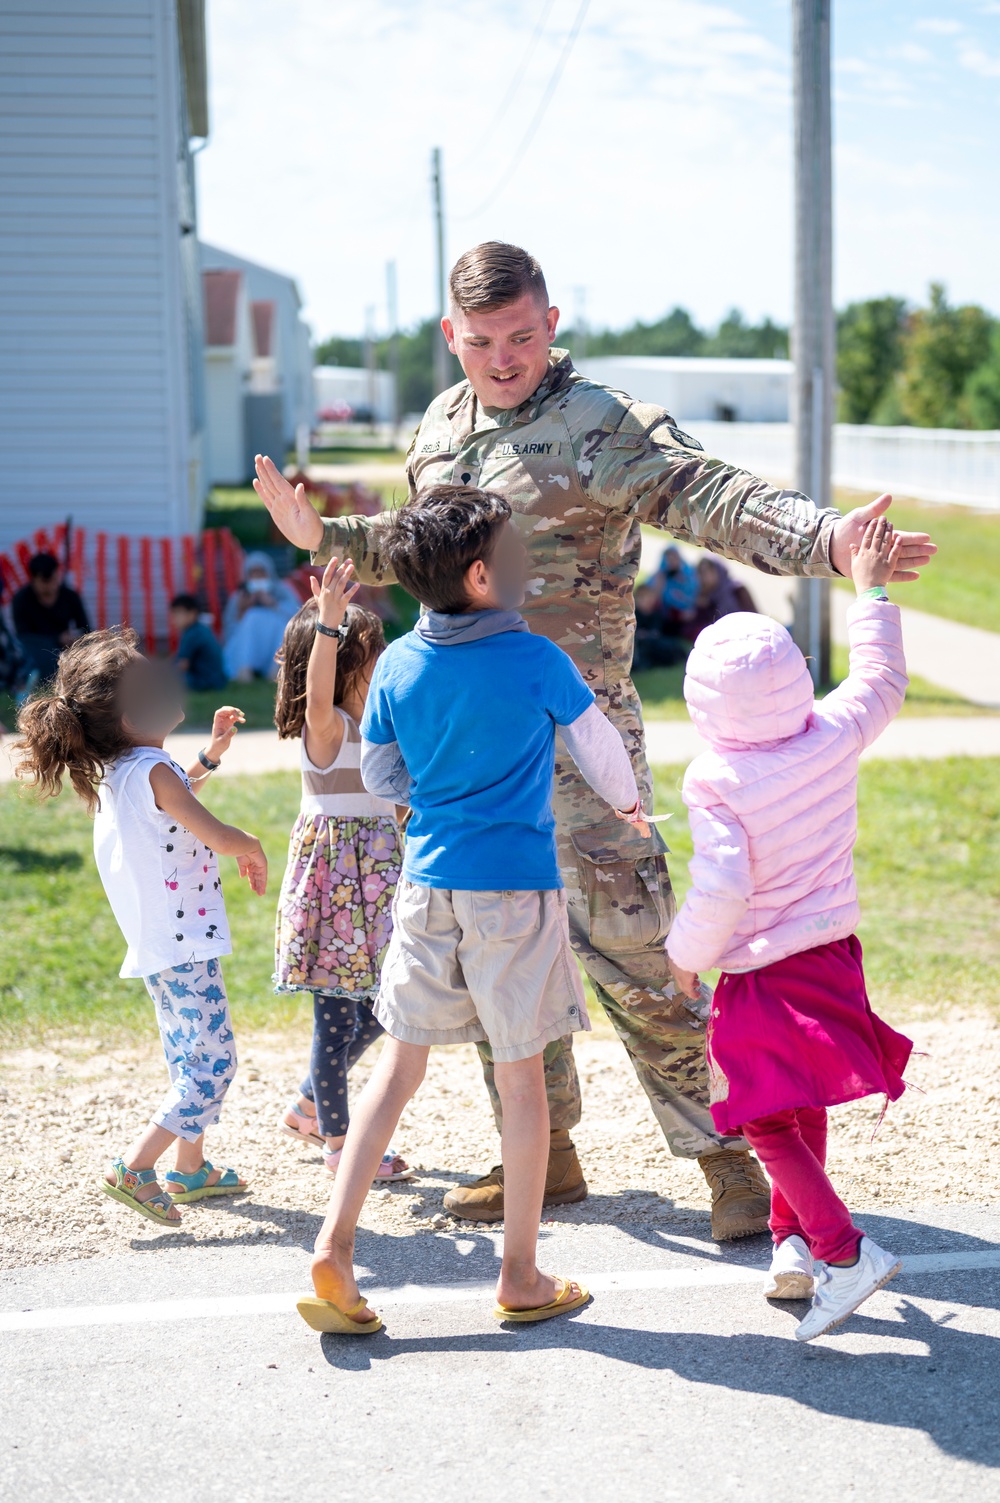 Task Force McCoy Soldier spends time with evacuees